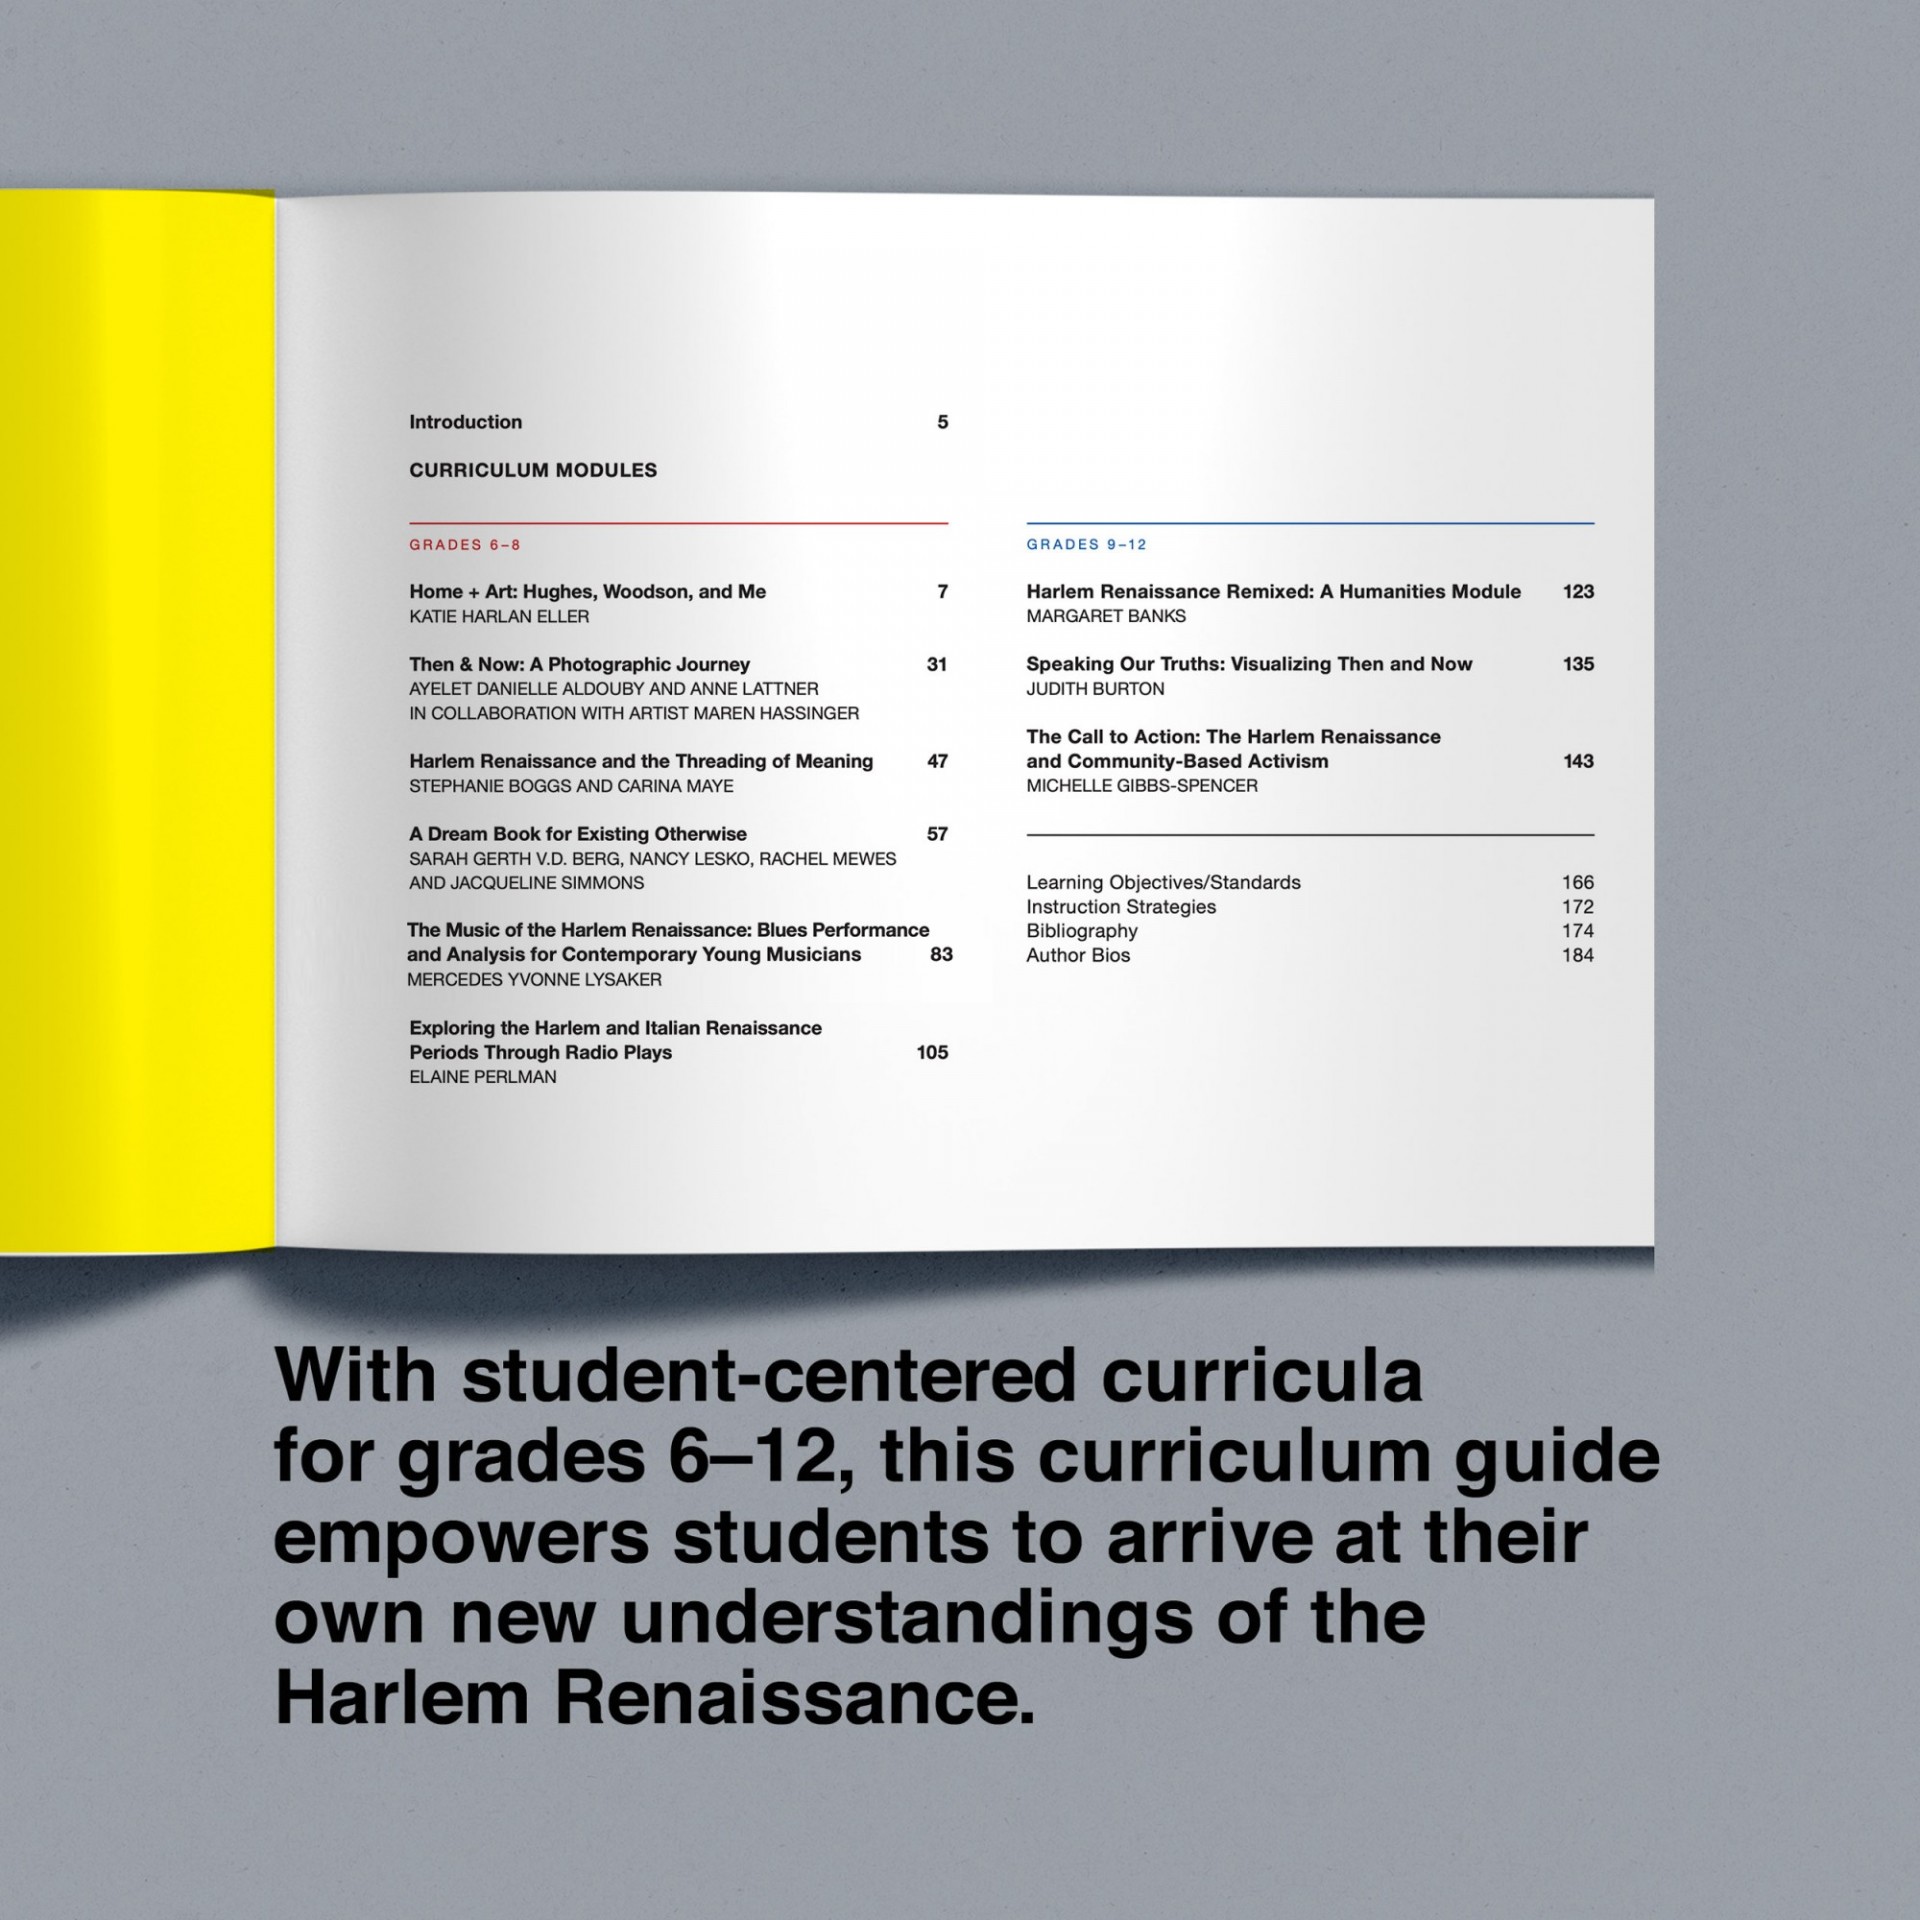 Table of contents for "Teaching the Harlem Renaissance in the 21st Century"